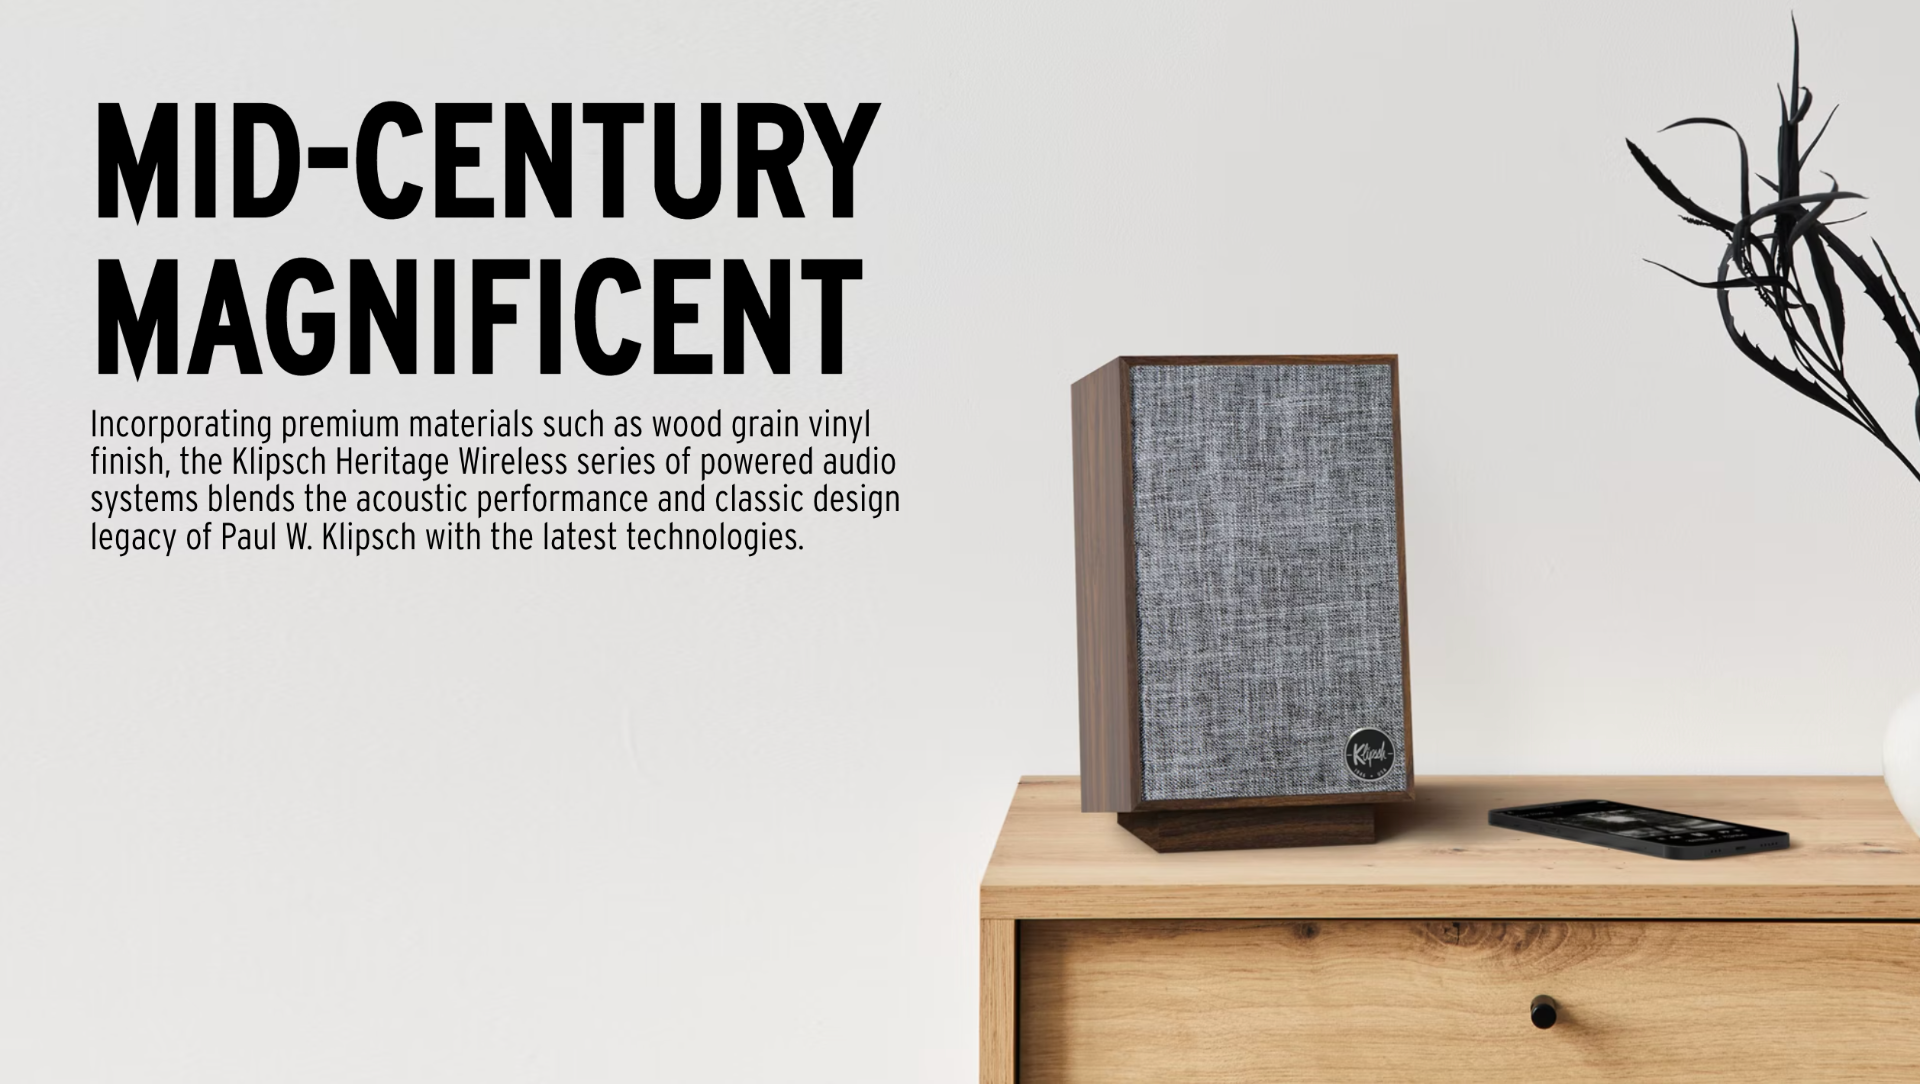 Incorporating premium materials such as wood grain vinyl finish, the Klipsch Heritage Wireless series of powered audio system blends the acoustic performance and classic design legacy of Paul W. Klipsch with the latest technologies.